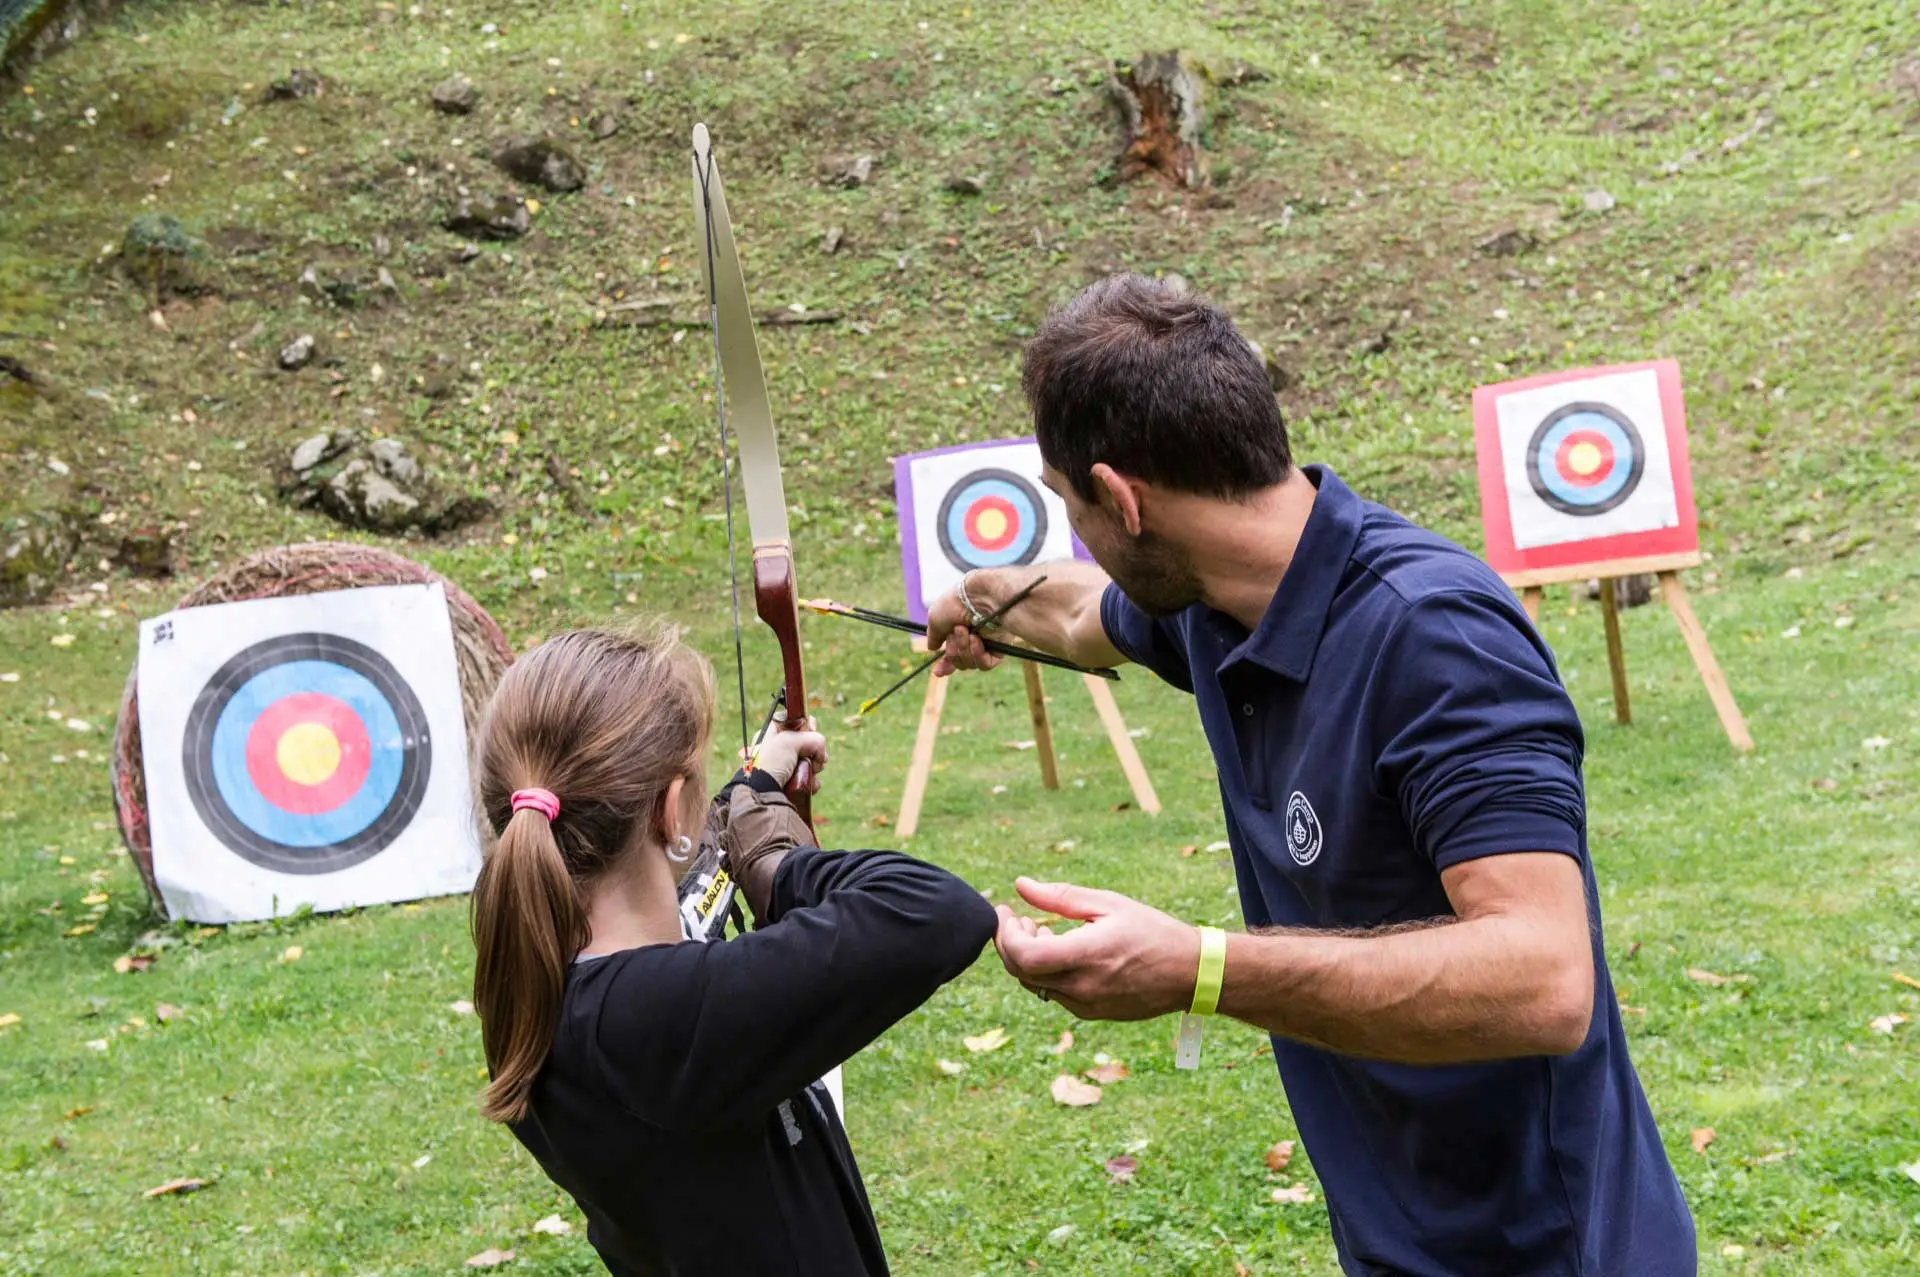 How do you find the archery range at summer camp?